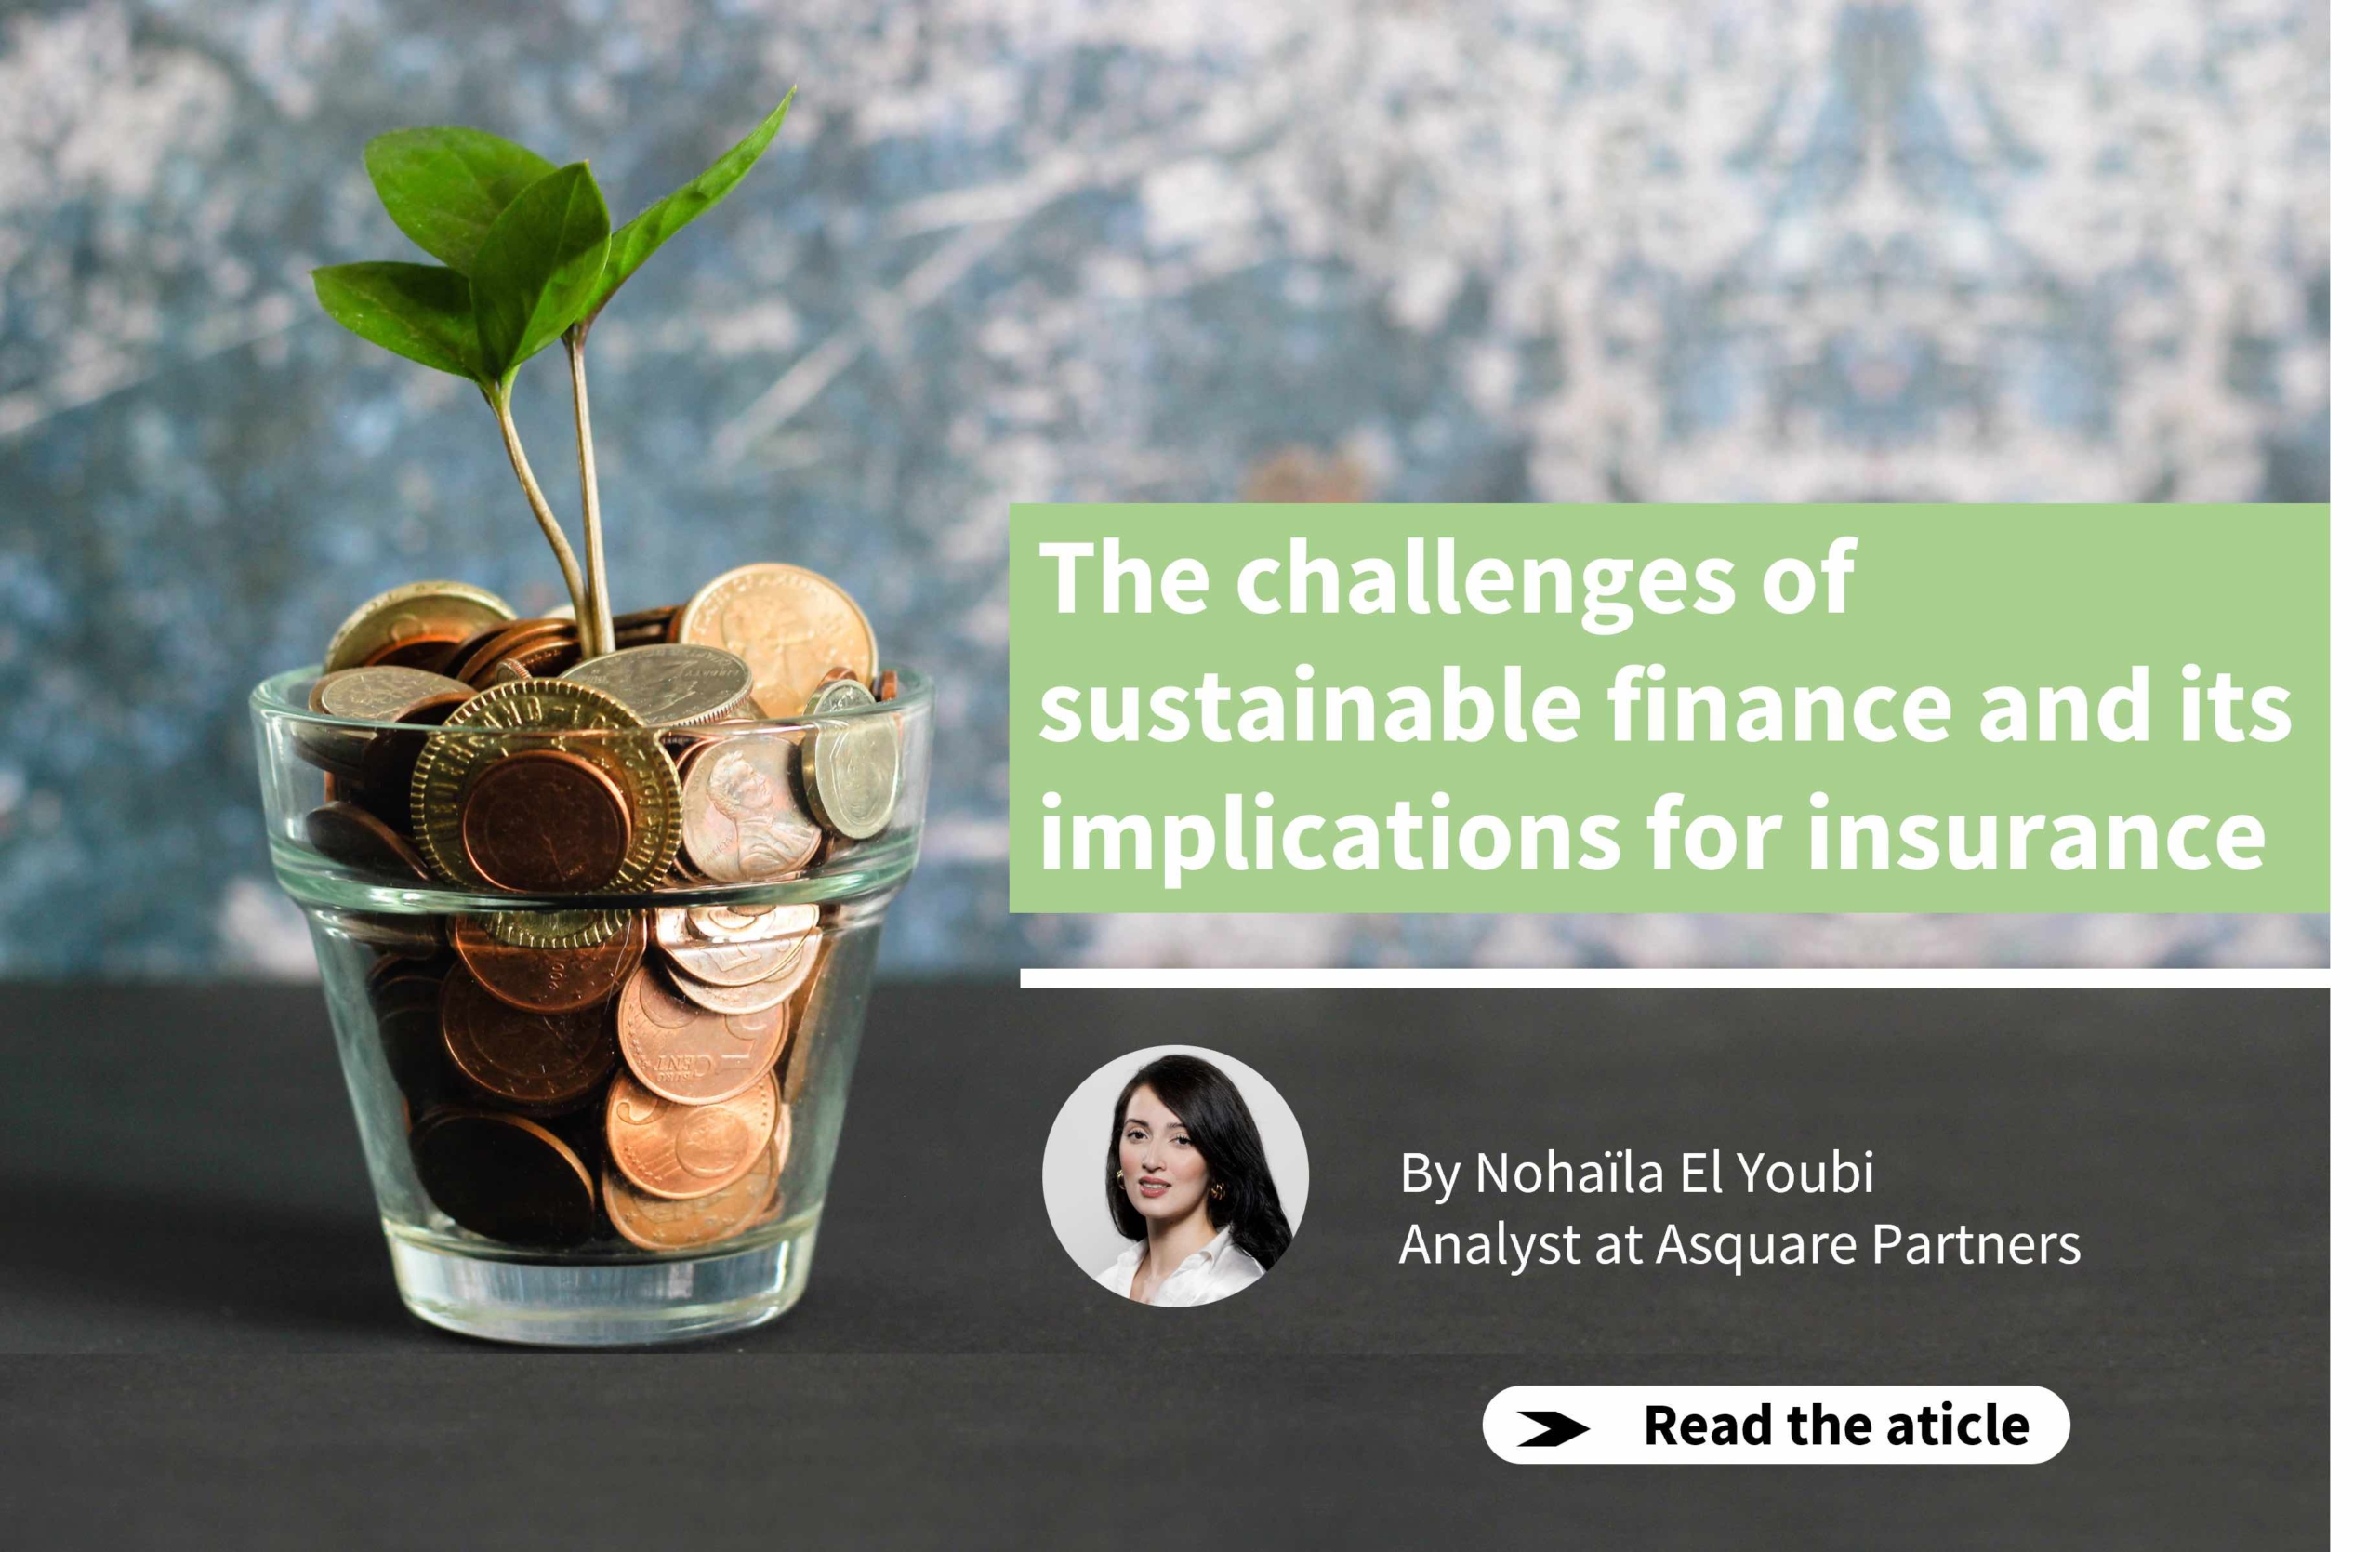 The challenges of sustainable finance and its implications for insurance